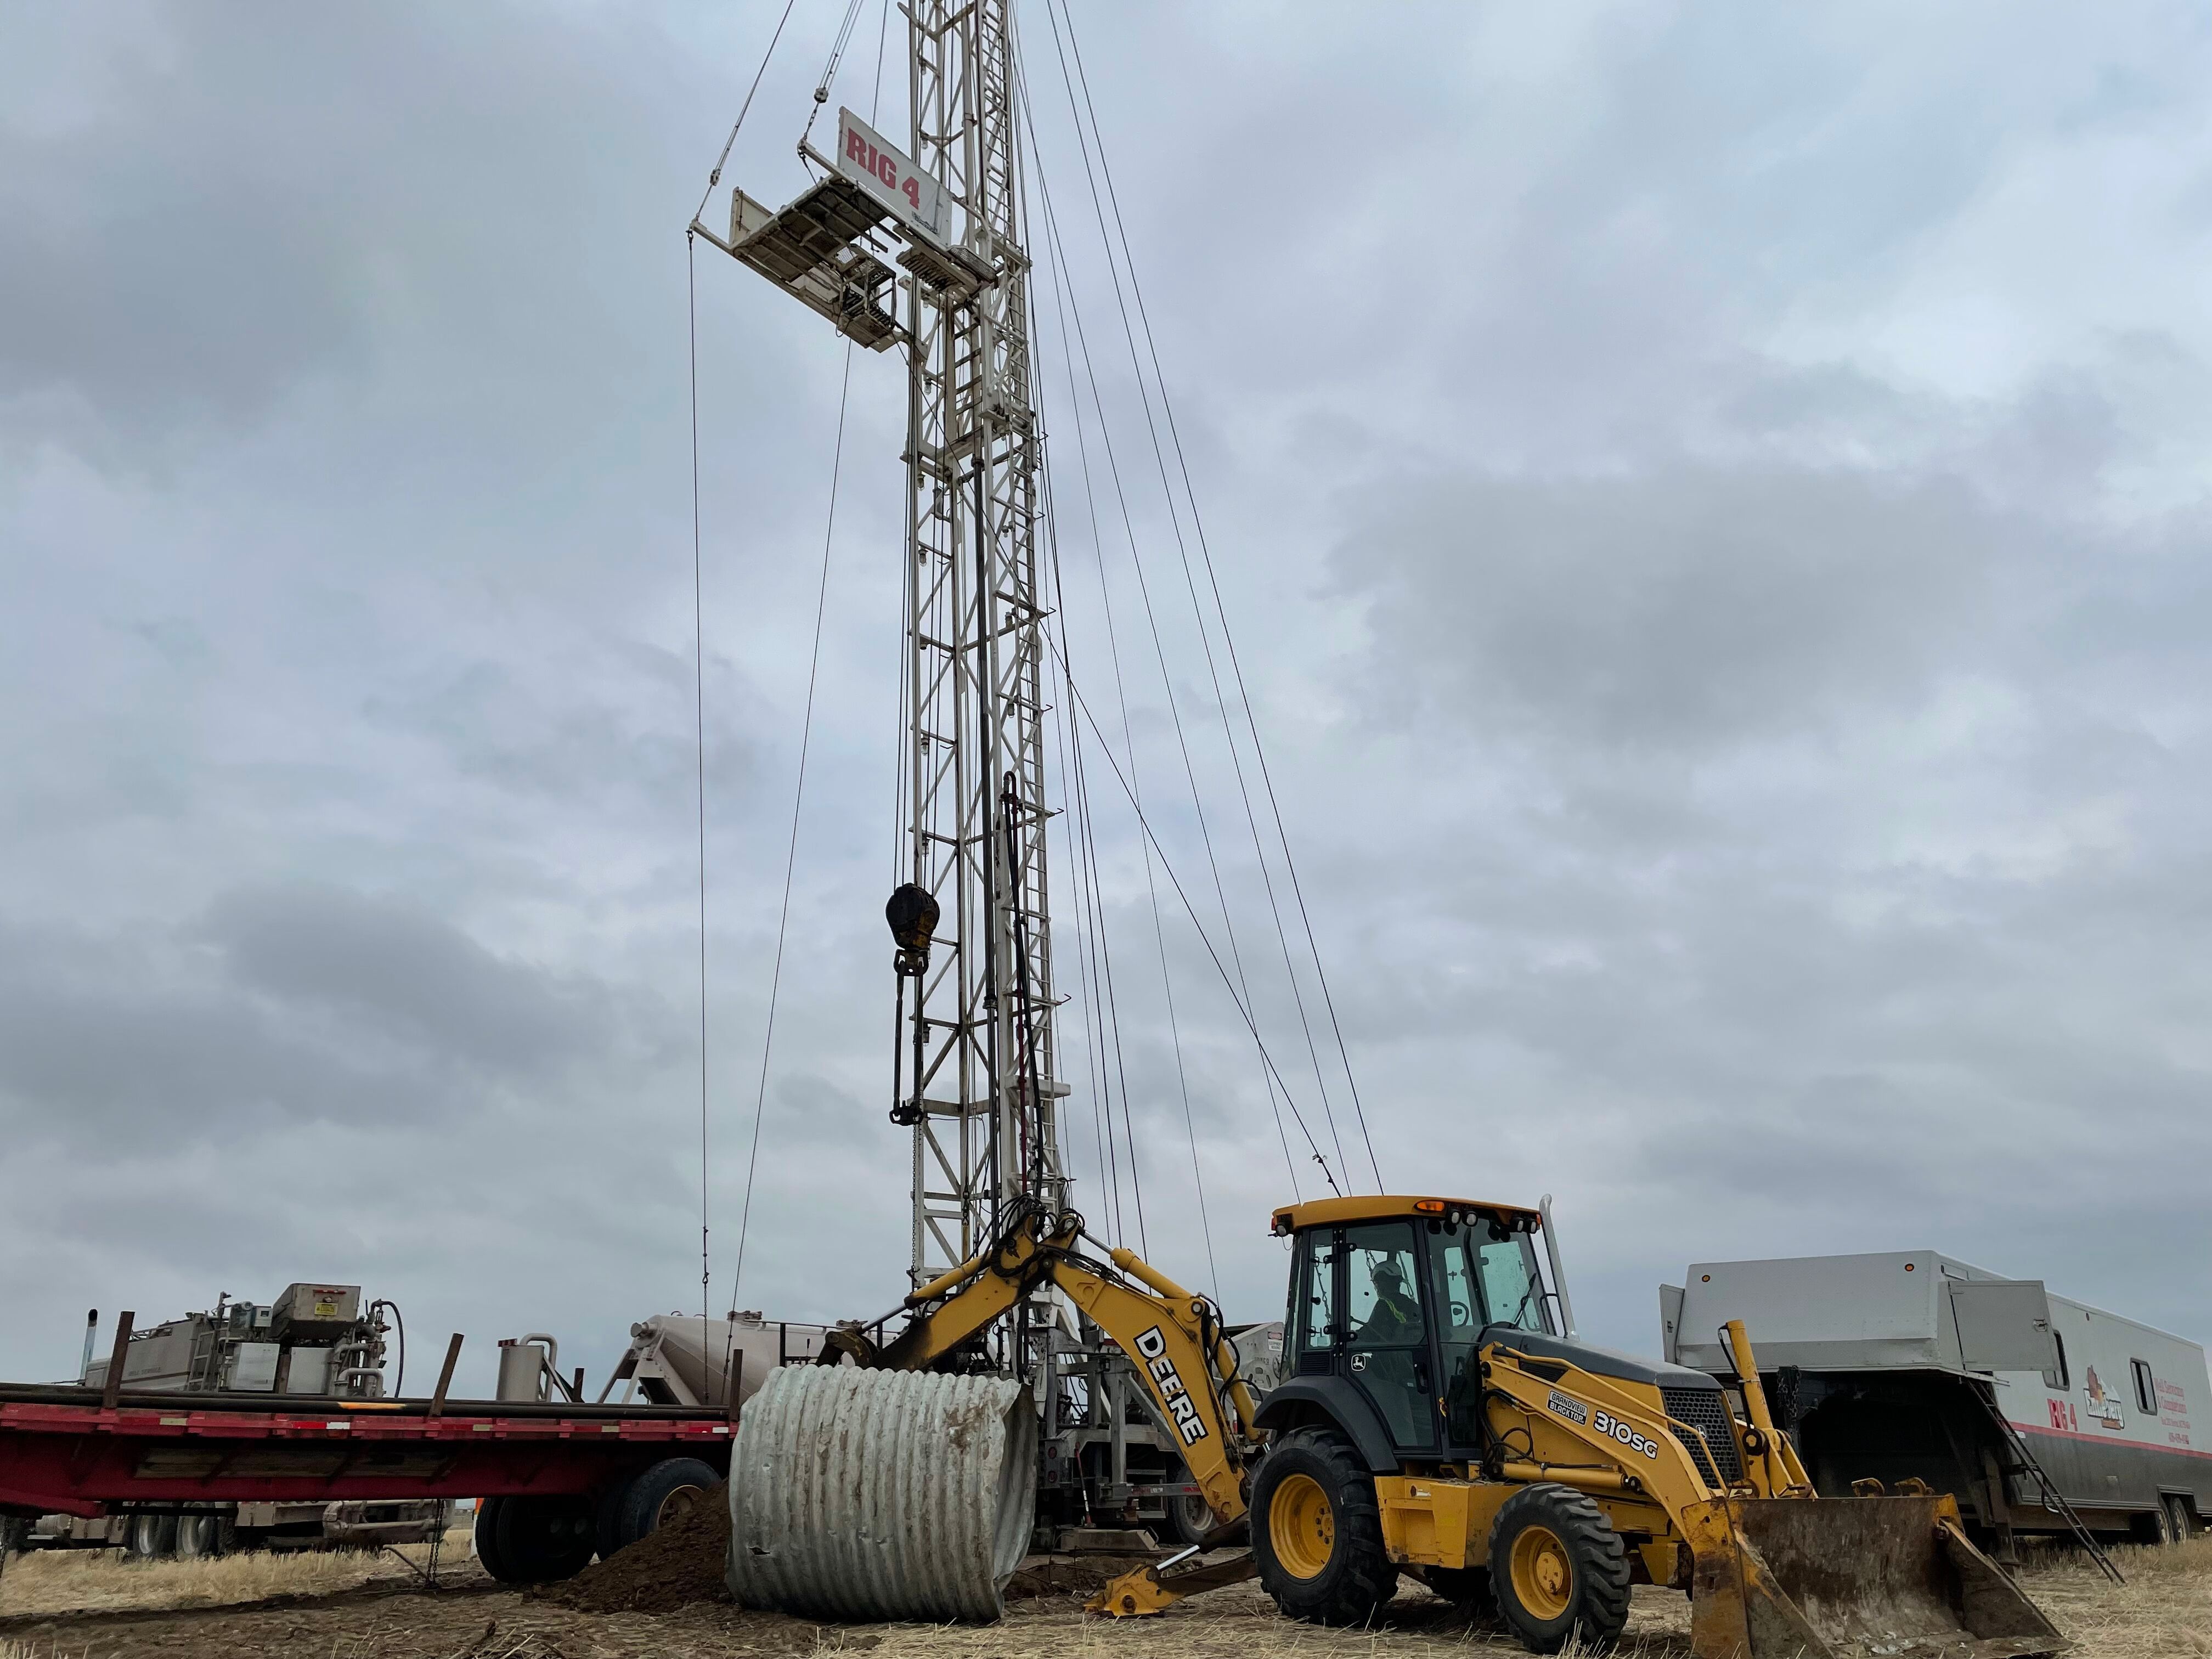 Rig at a well plugging site. CC Lab 2022.